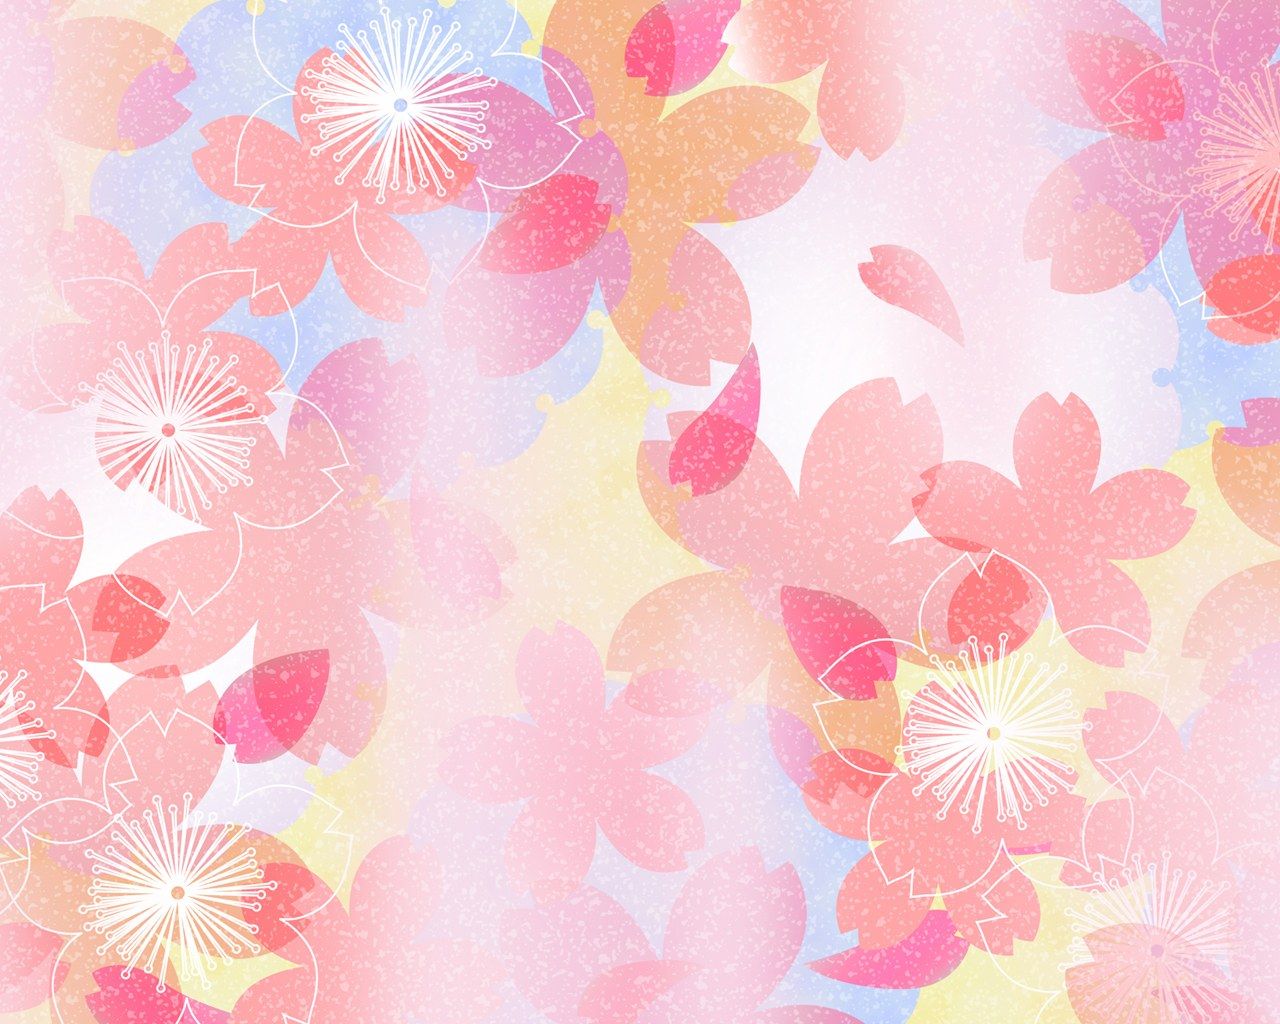 Colors in Japanese Style - Sweet Flower Pattern Design 1280x1024